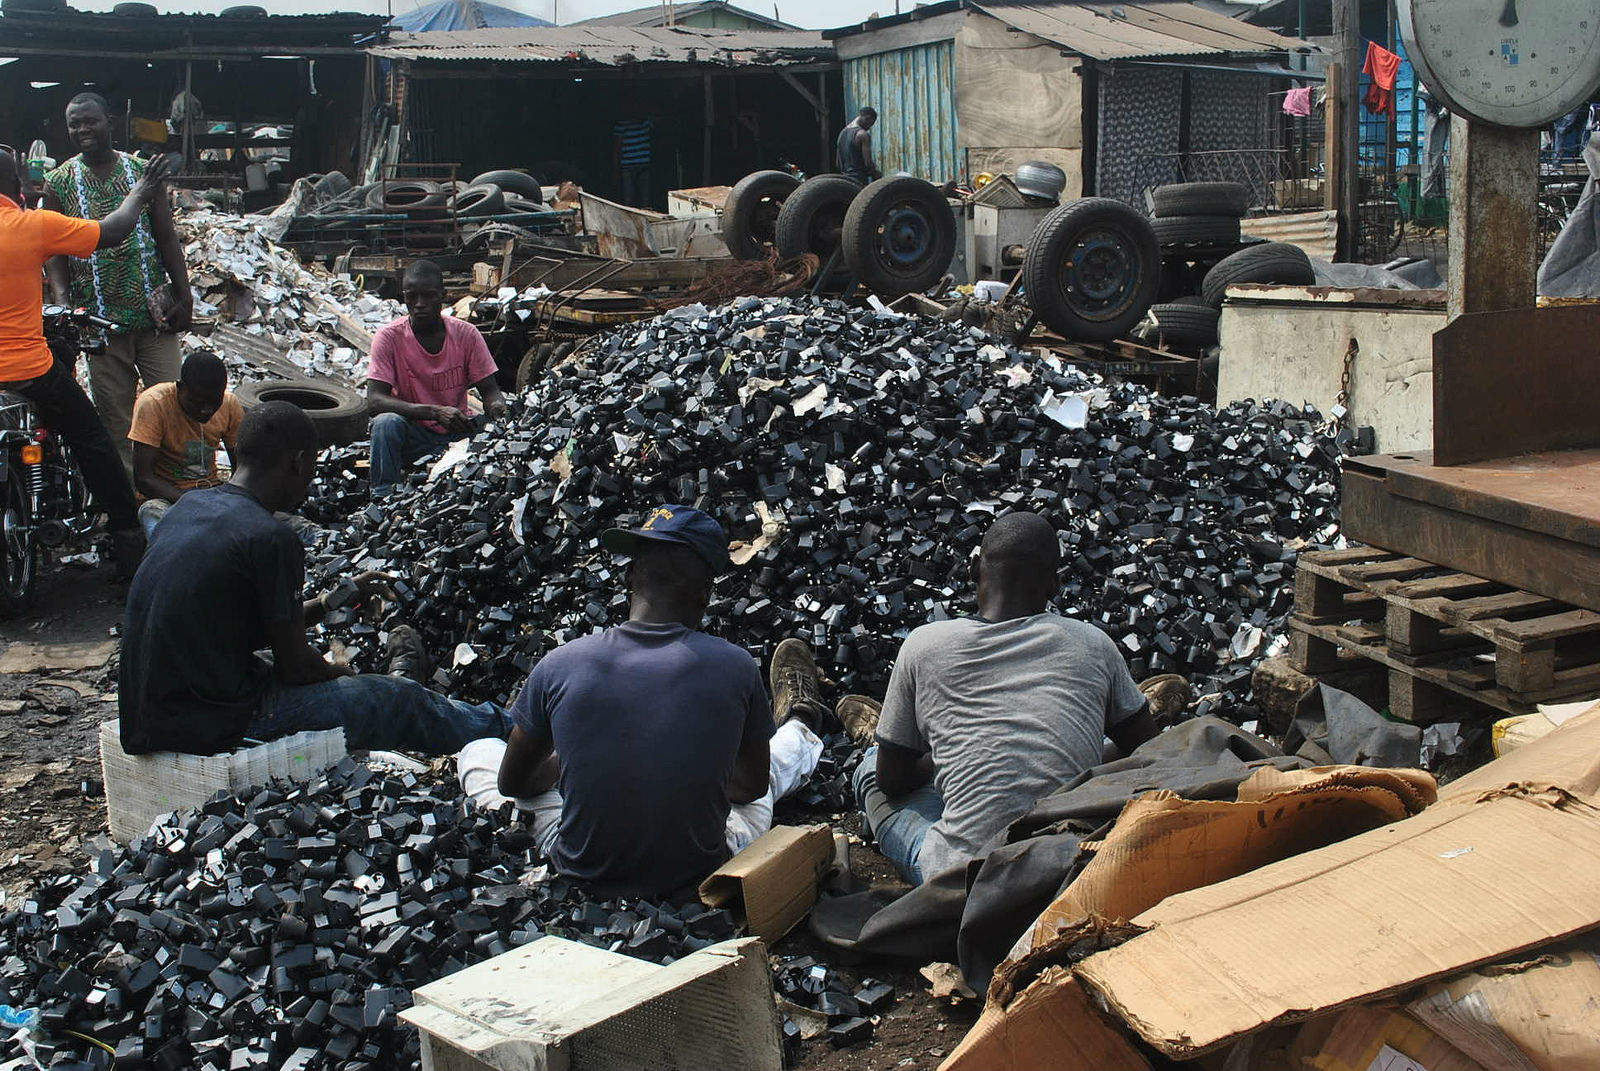 Loads of mobile phones end up in Ghana, where they may or may not be recycled properly.